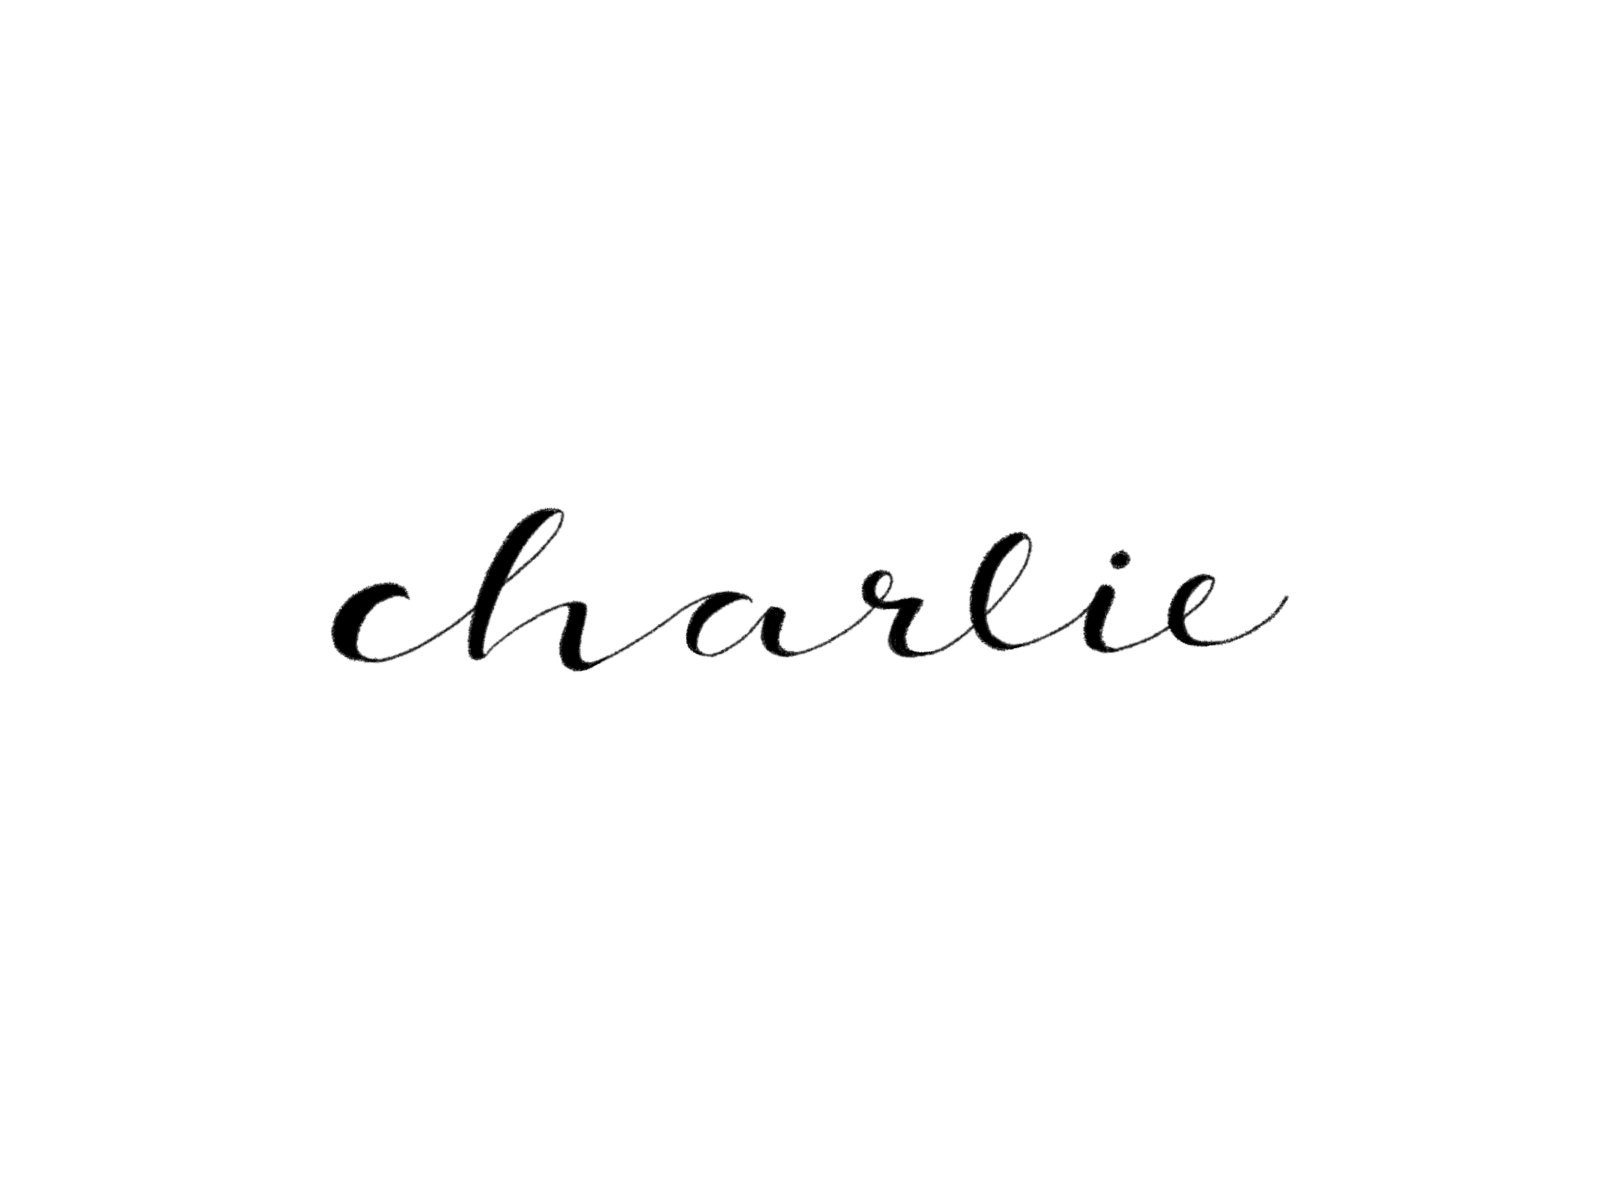 Charlie animate animated gif animated type gif gif animation hand drawn type lettering script type typography typography gif